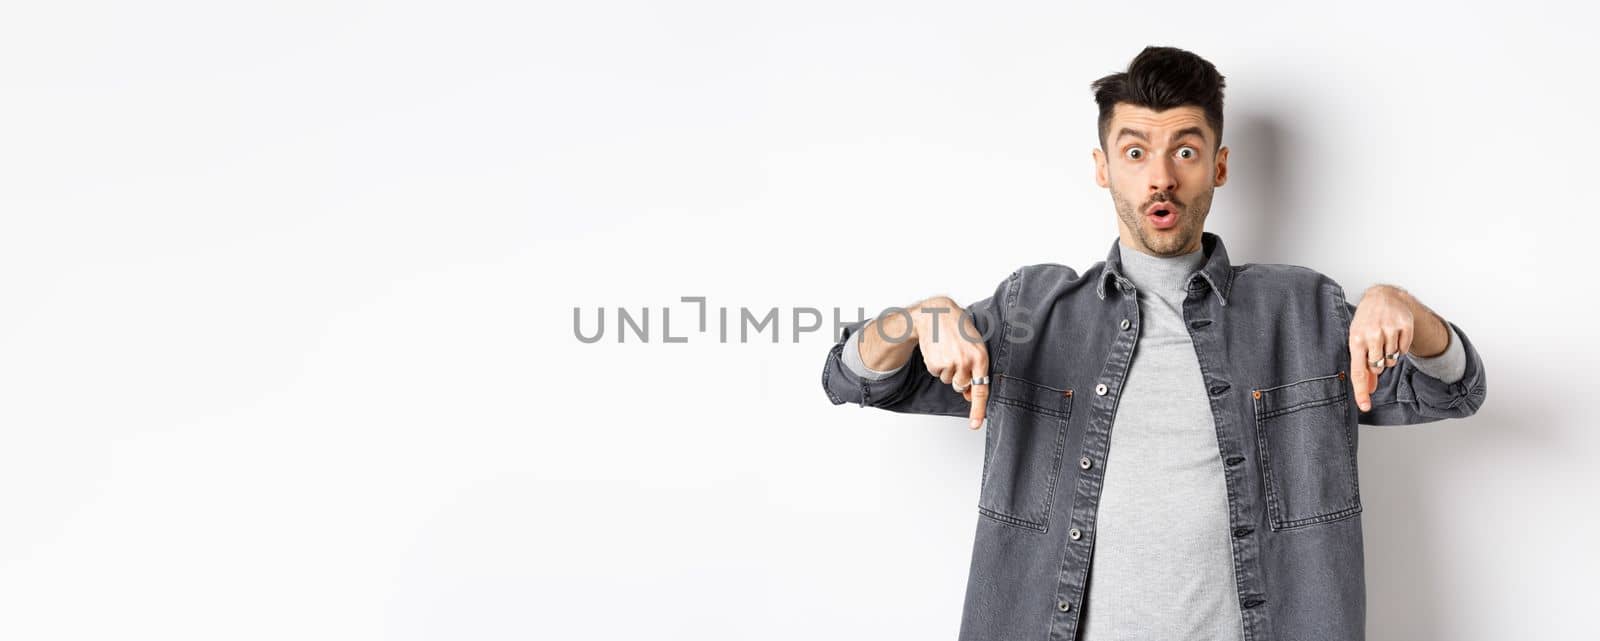 Excited guy say wow, pointing fingers down amazed, showing cool promo offer, standing on white background in denim jacket.